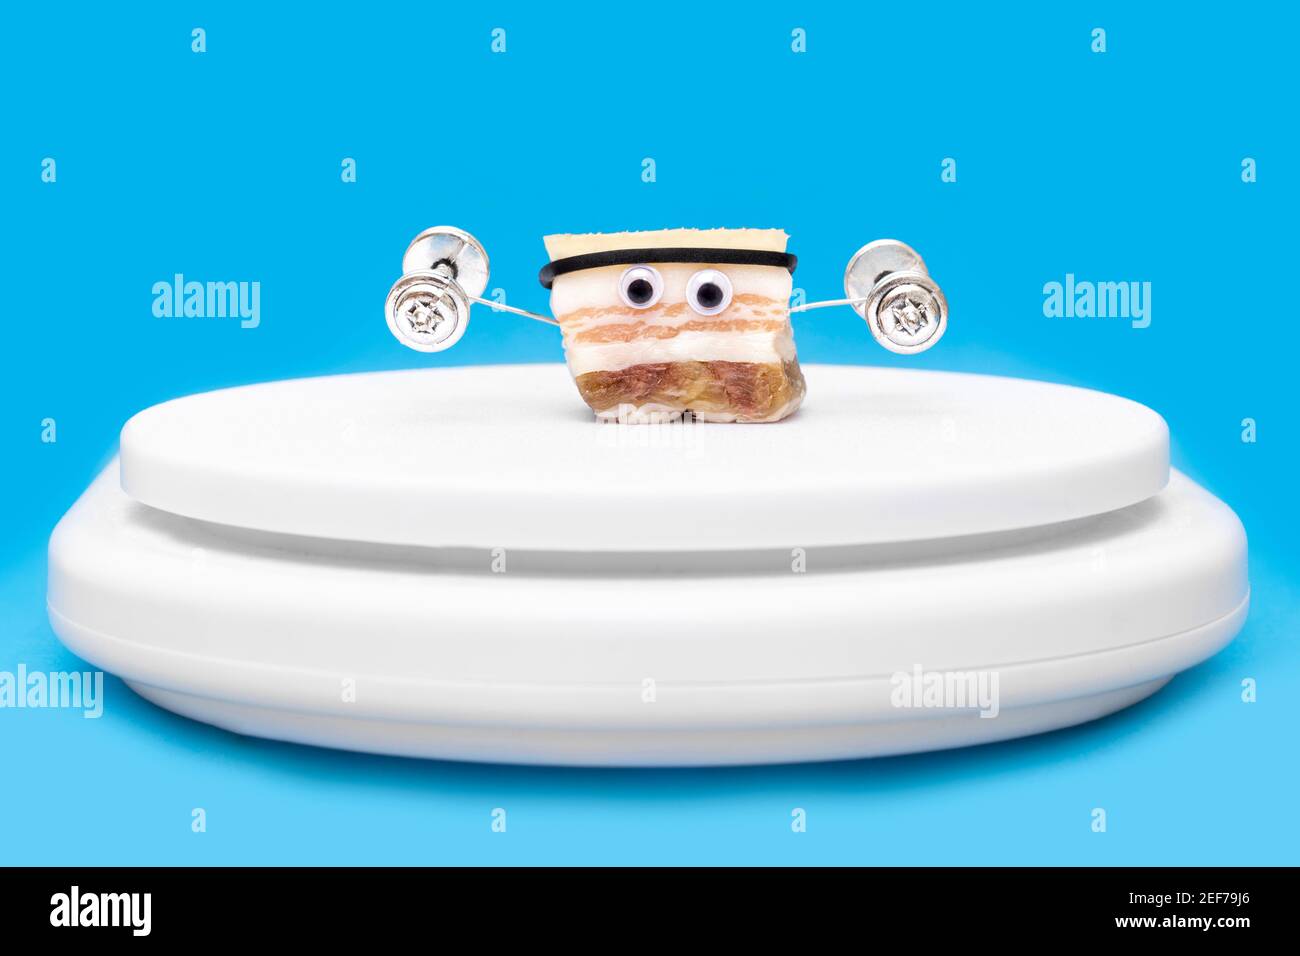 Close-up of a funny character made of salted pork fat lifting dumbbells standing on kitchen scales against a light blue background. Creative fat burni Stock Photo